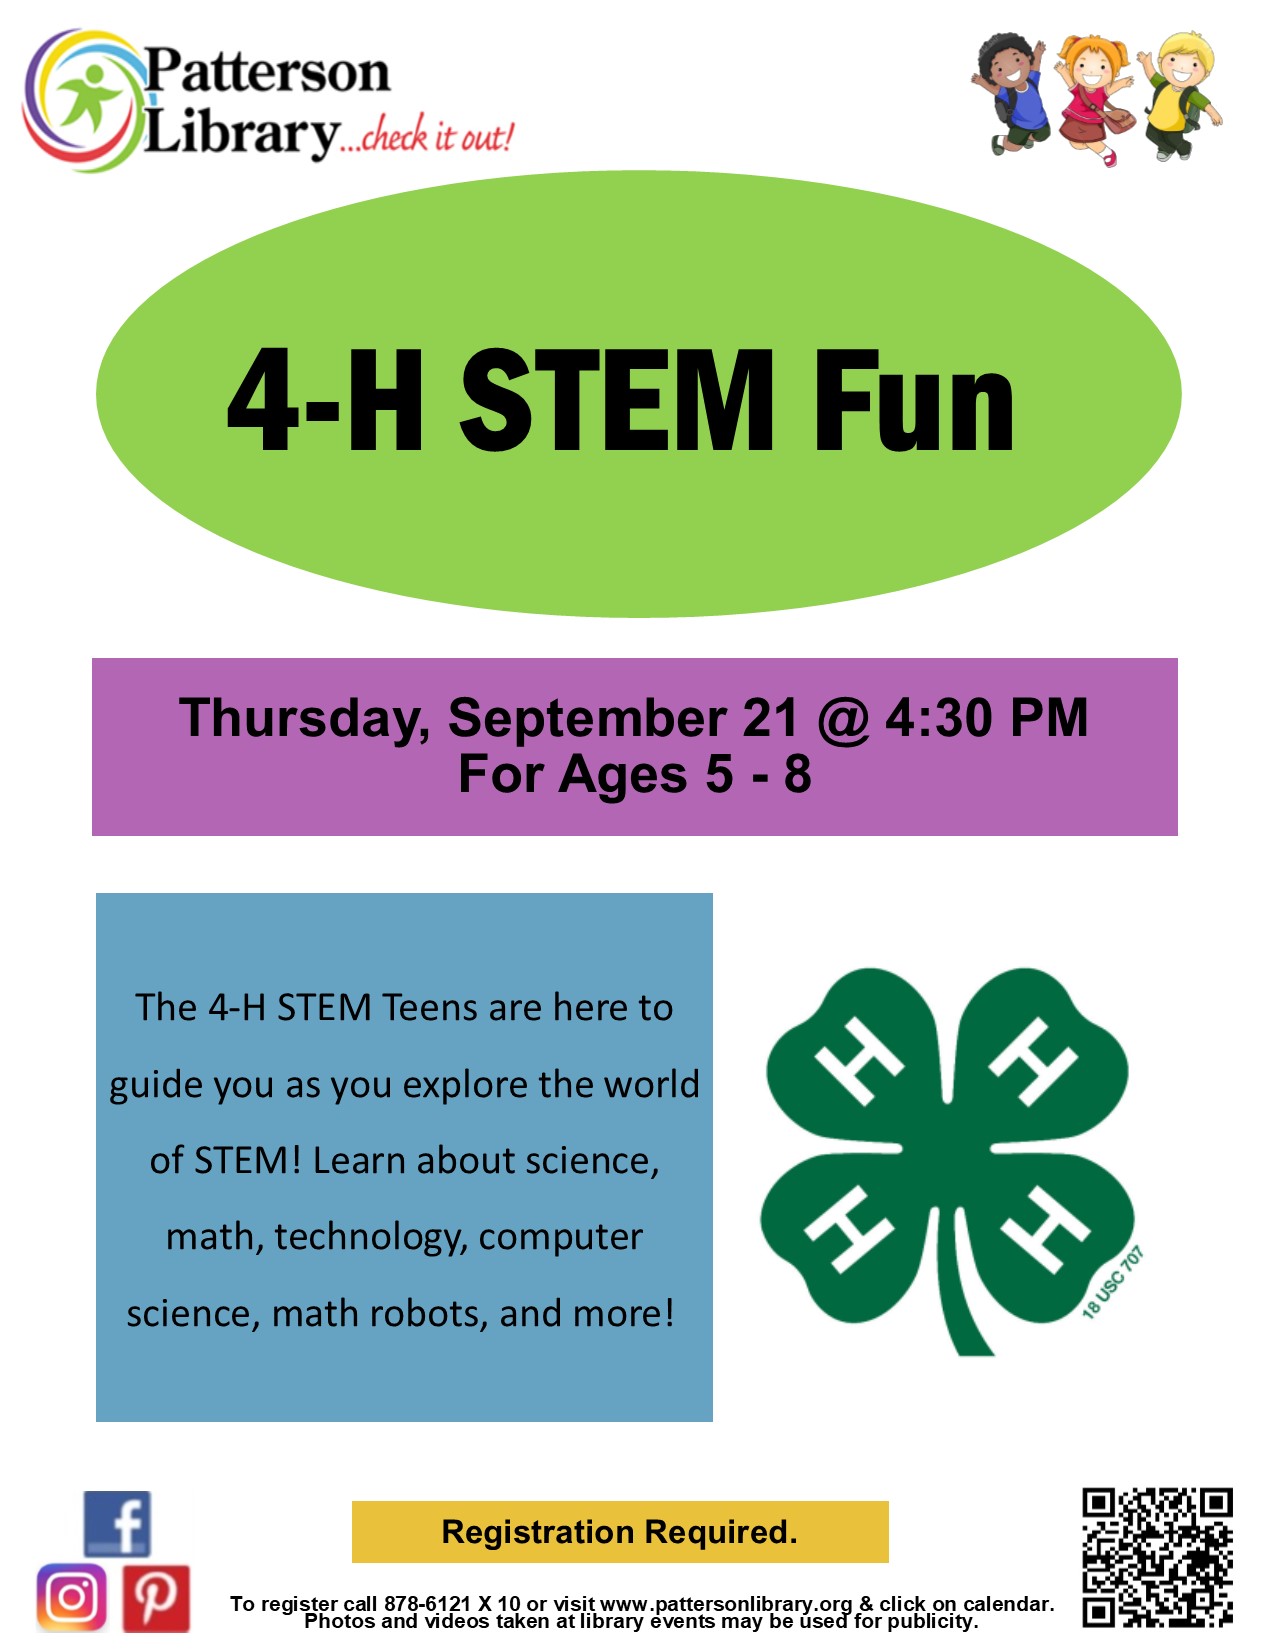 The 4-H STEM Teens are here to guide you as you explore the world of STEM.